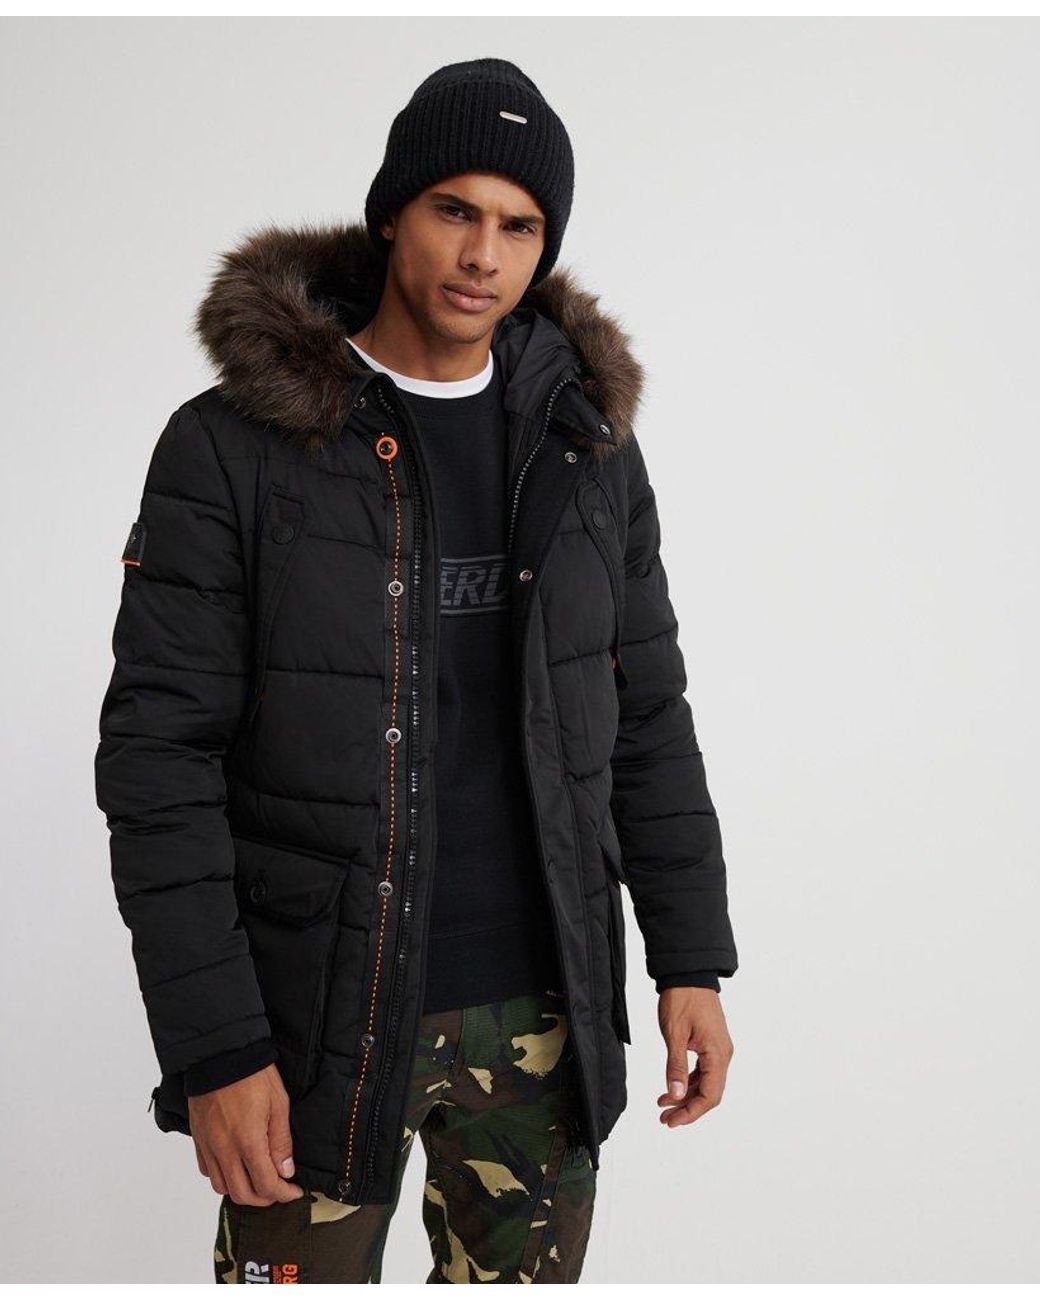 Superdry Wool Chinook Parka Jacket in Black for Men - Lyst